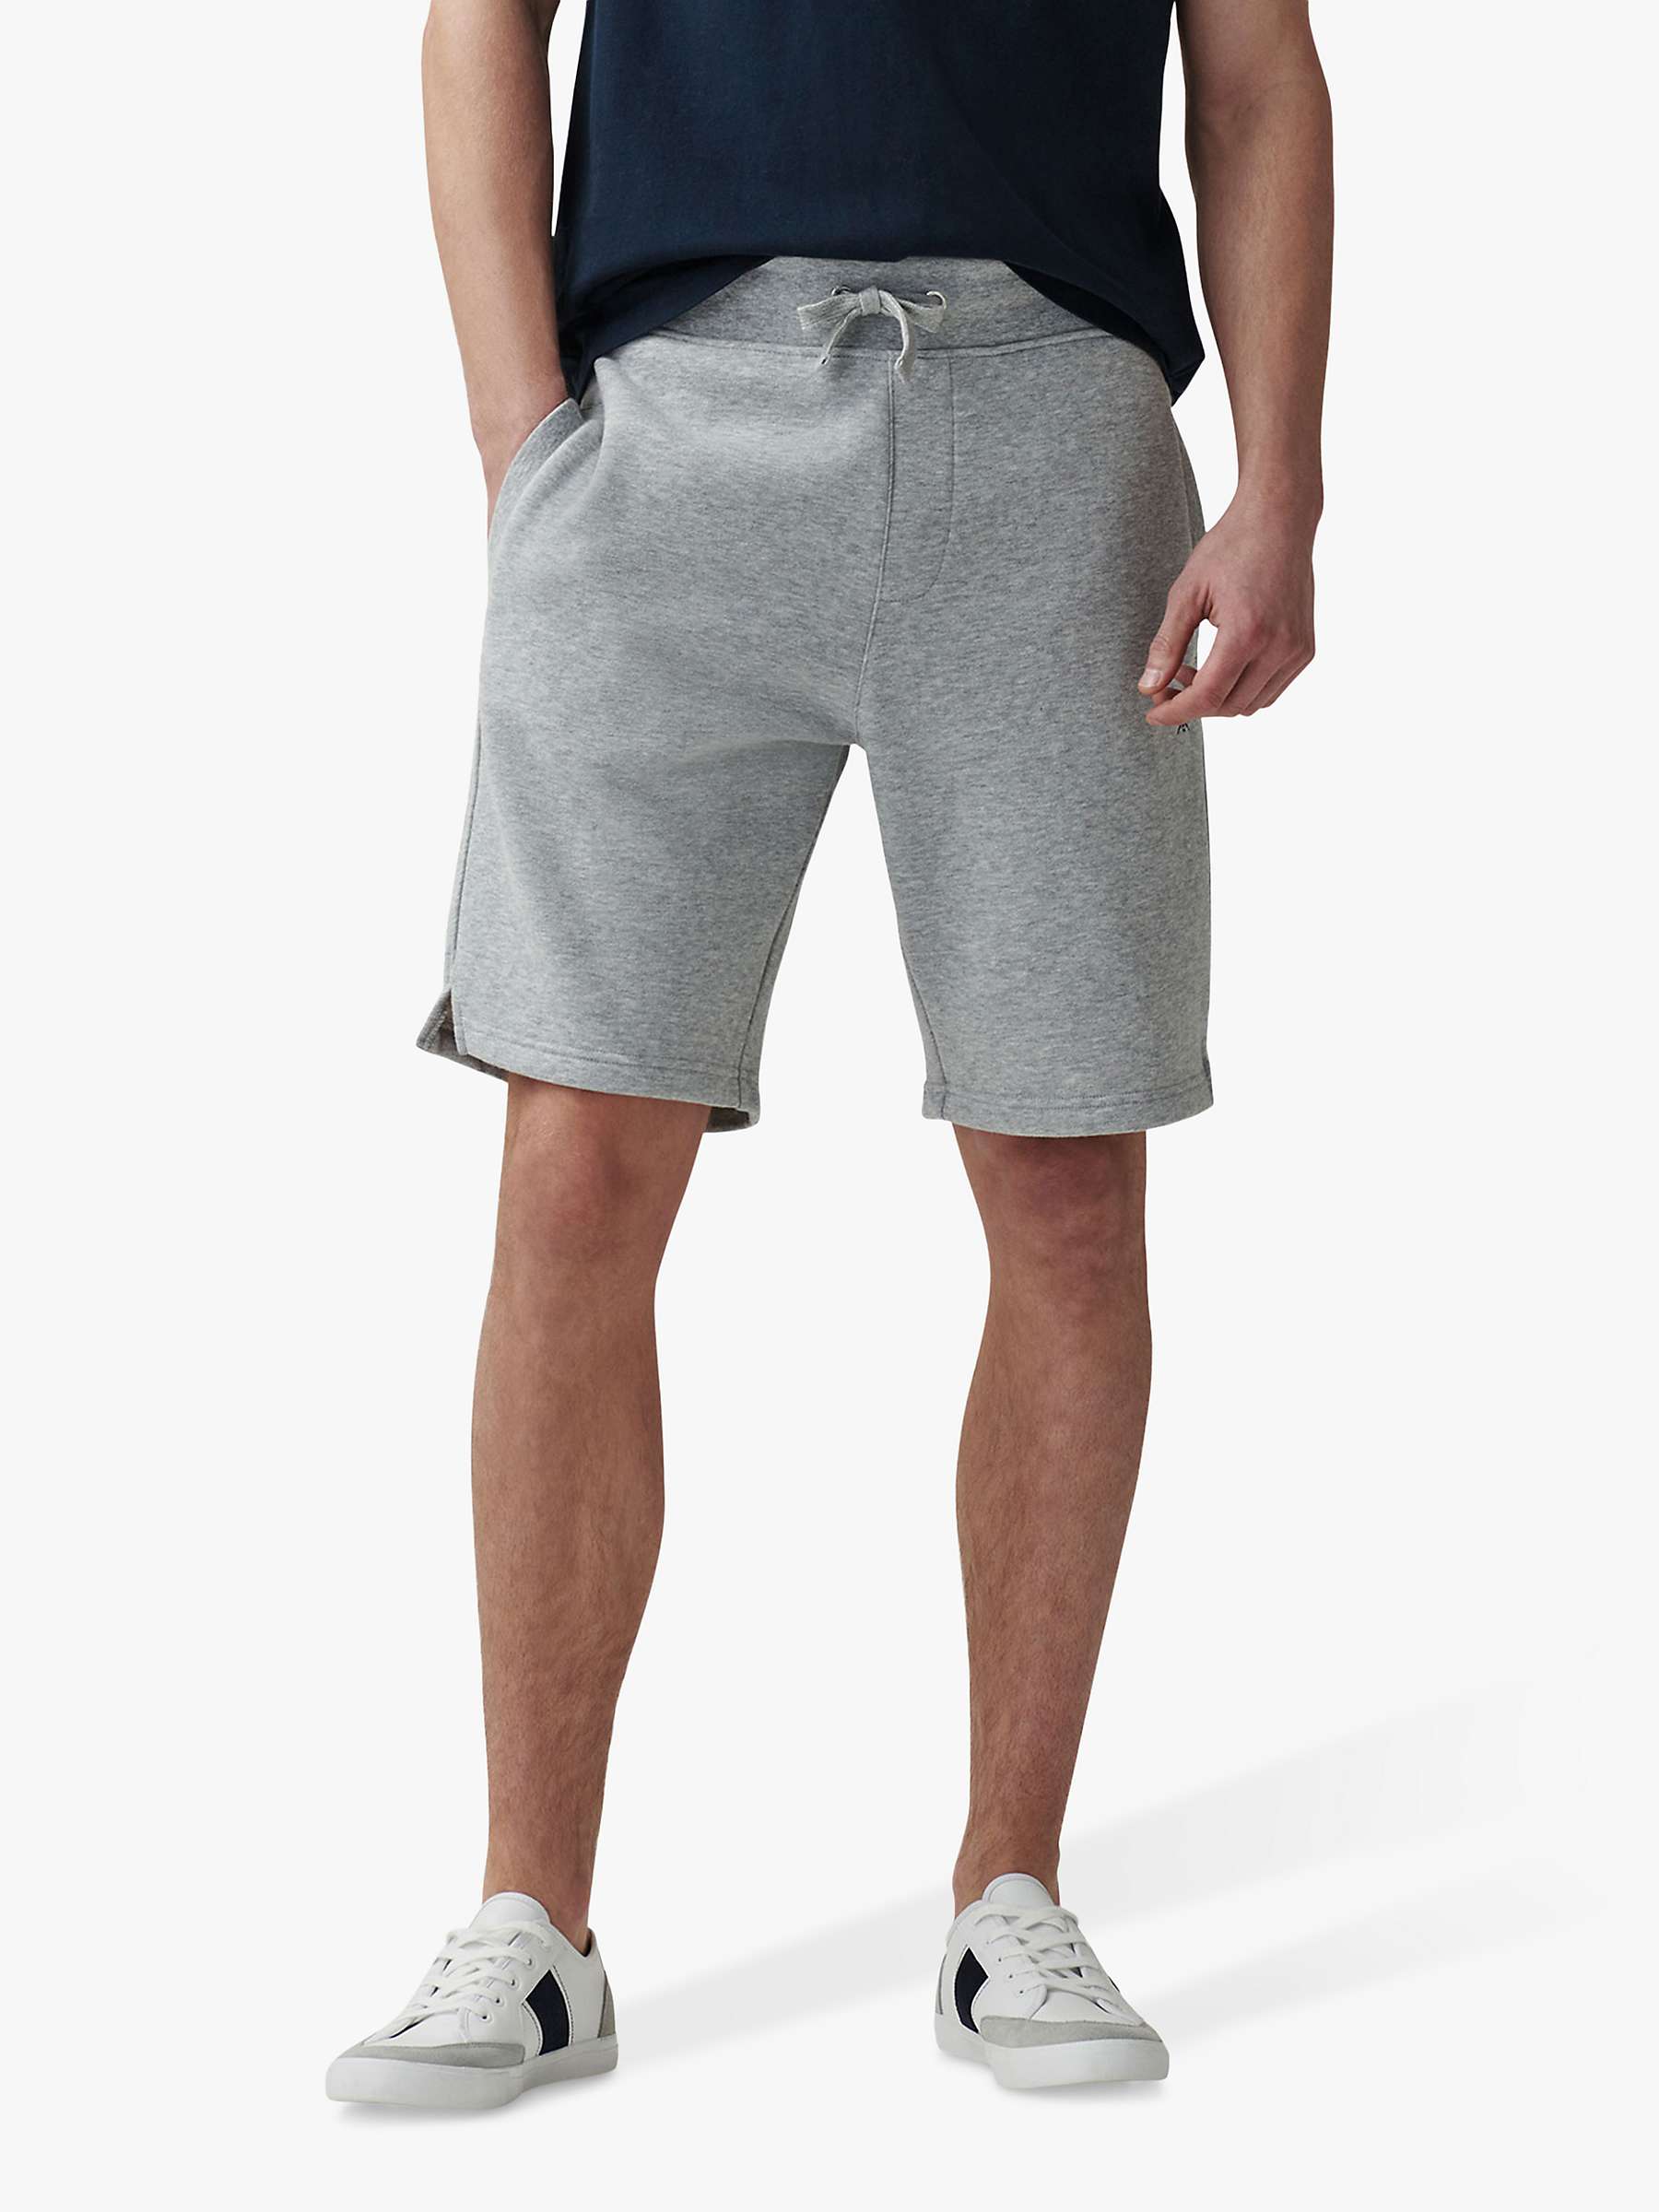 Buy Crew Clothing Crossed Oars Cotton Blend Sweat Shorts Online at johnlewis.com